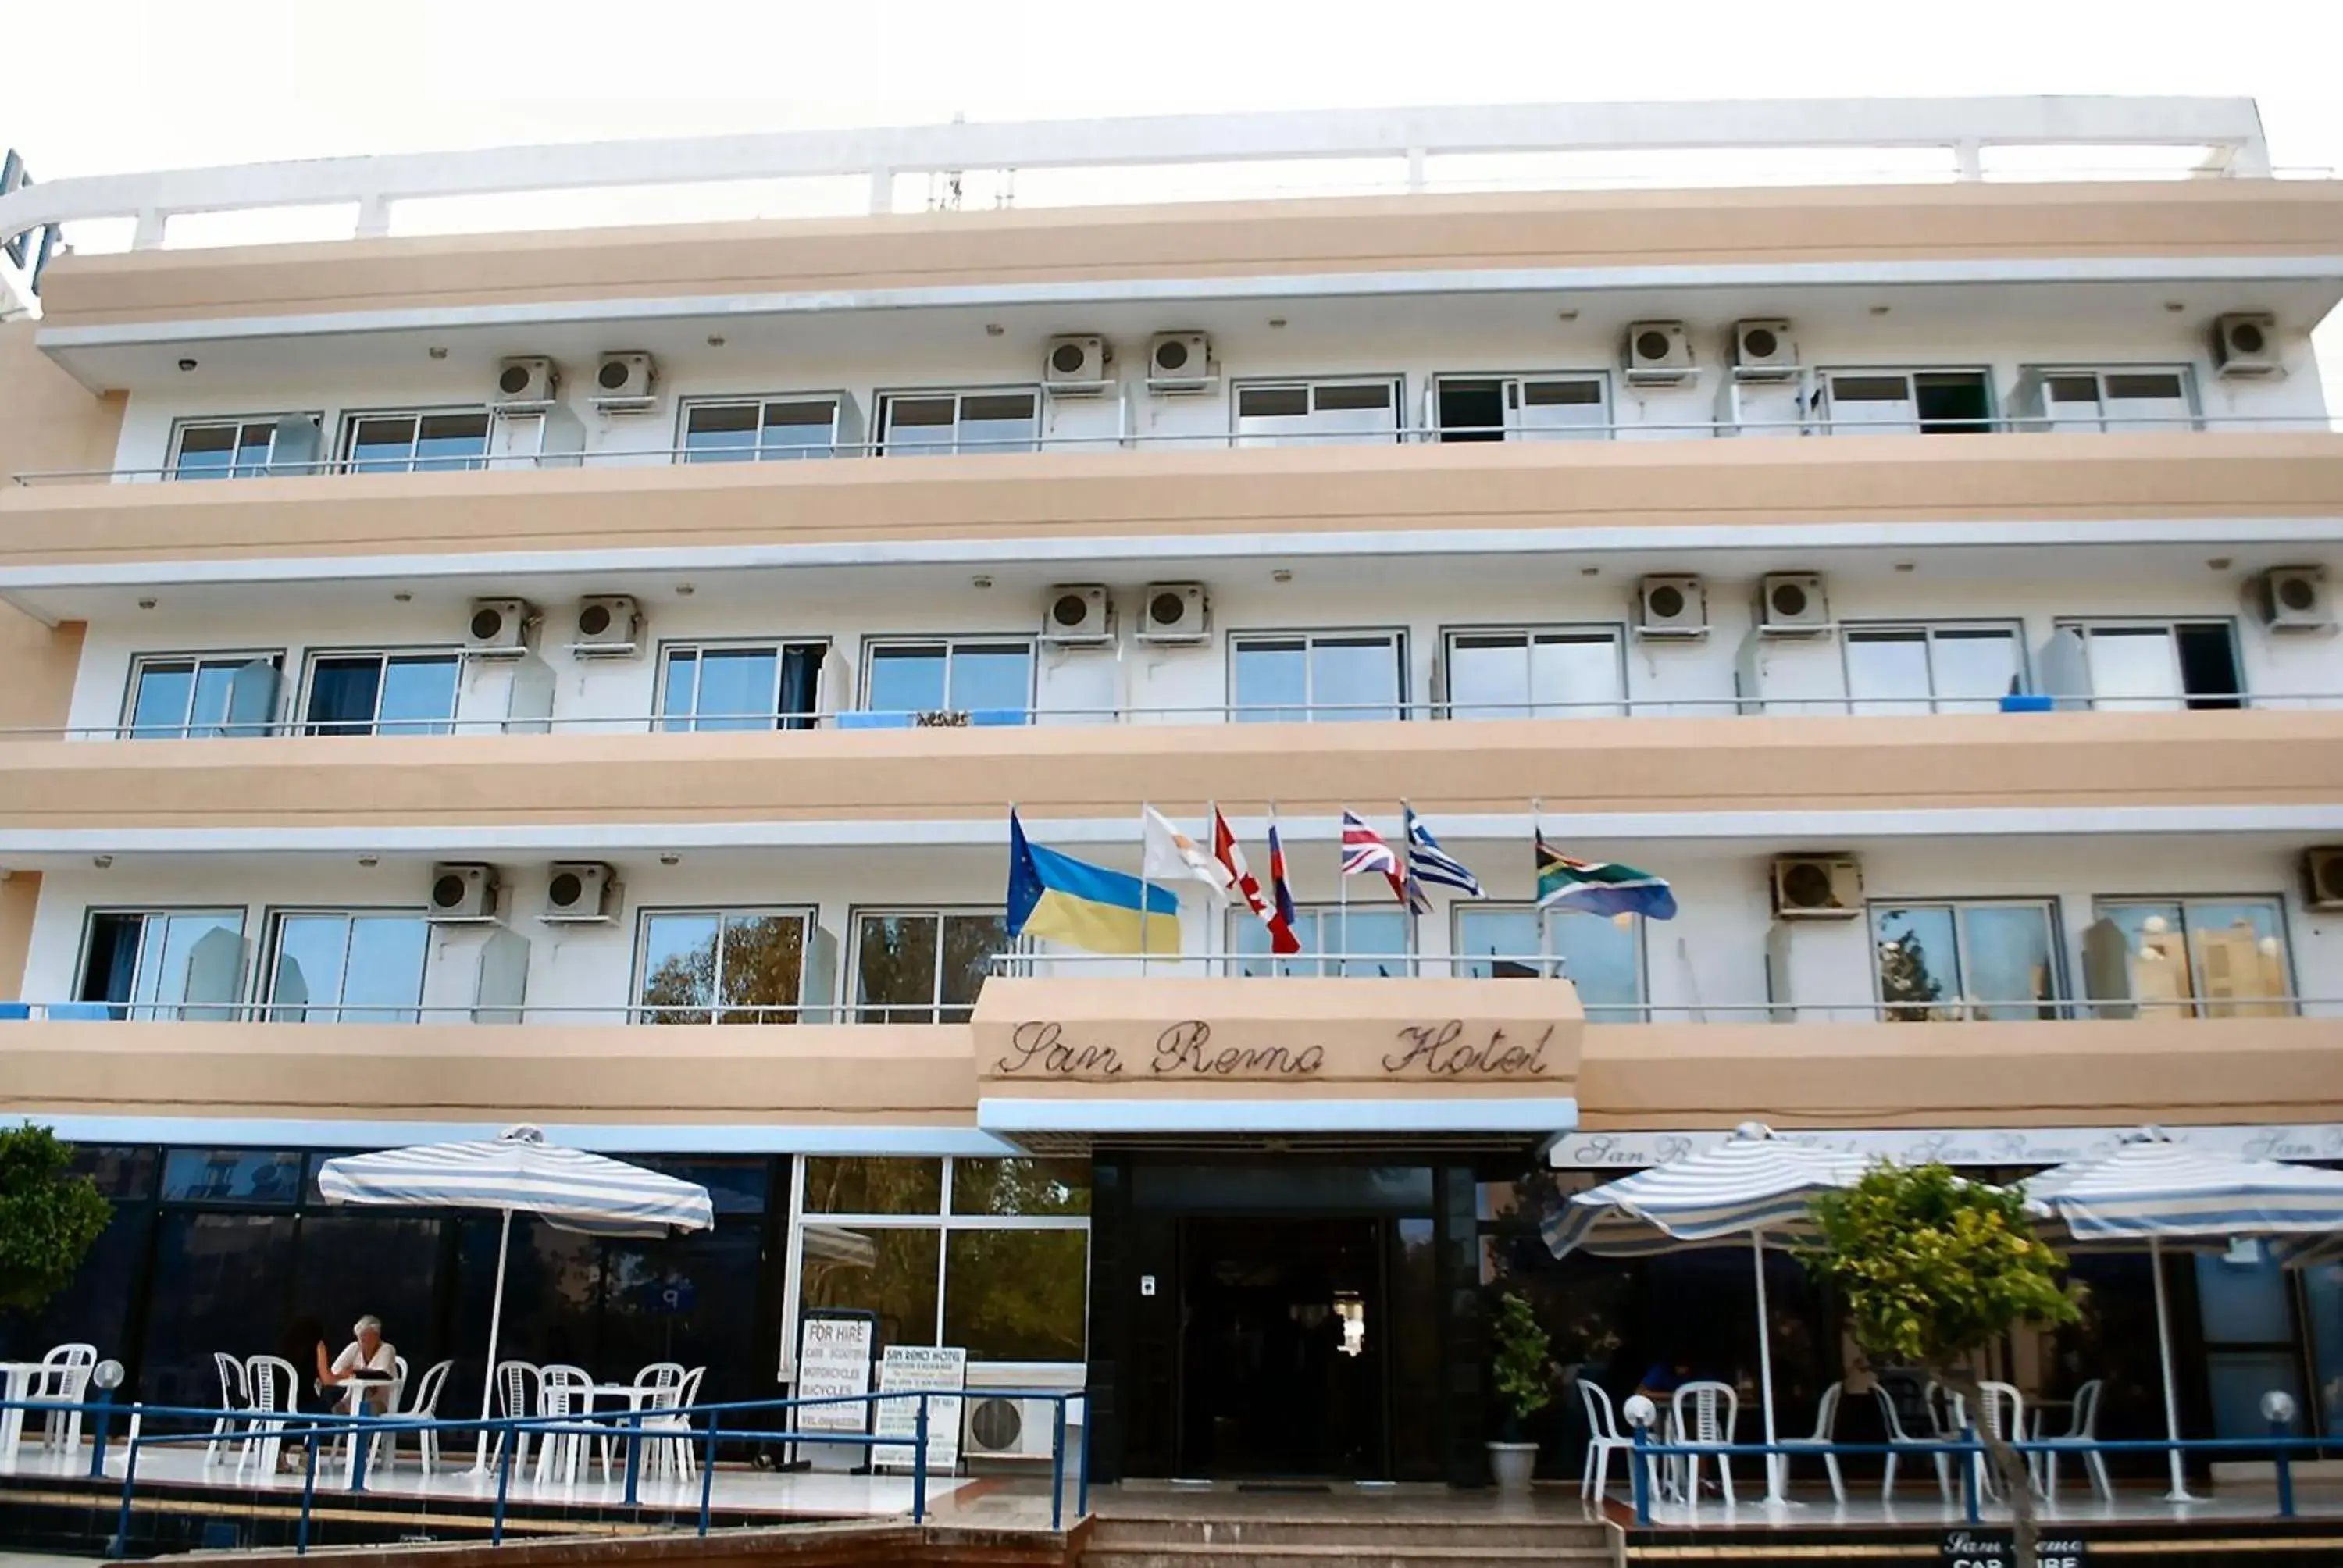 Property Building in San Remo Hotel